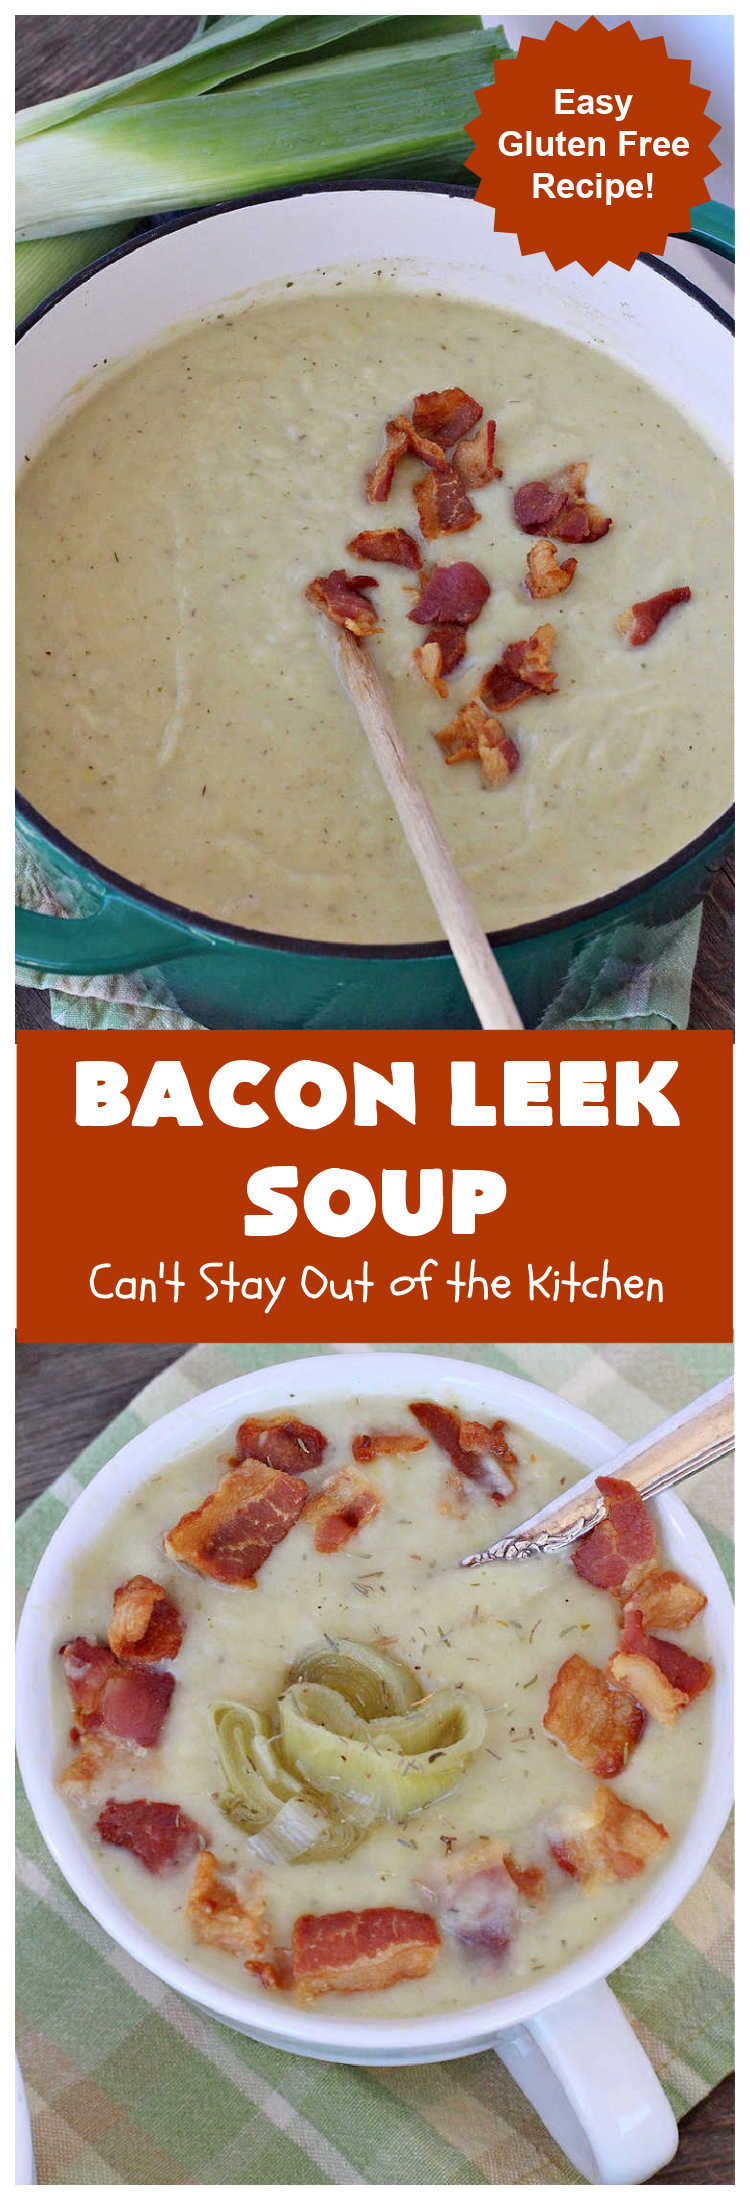 Bacon Leek Soup | Can't Stay Out of the Kitchen